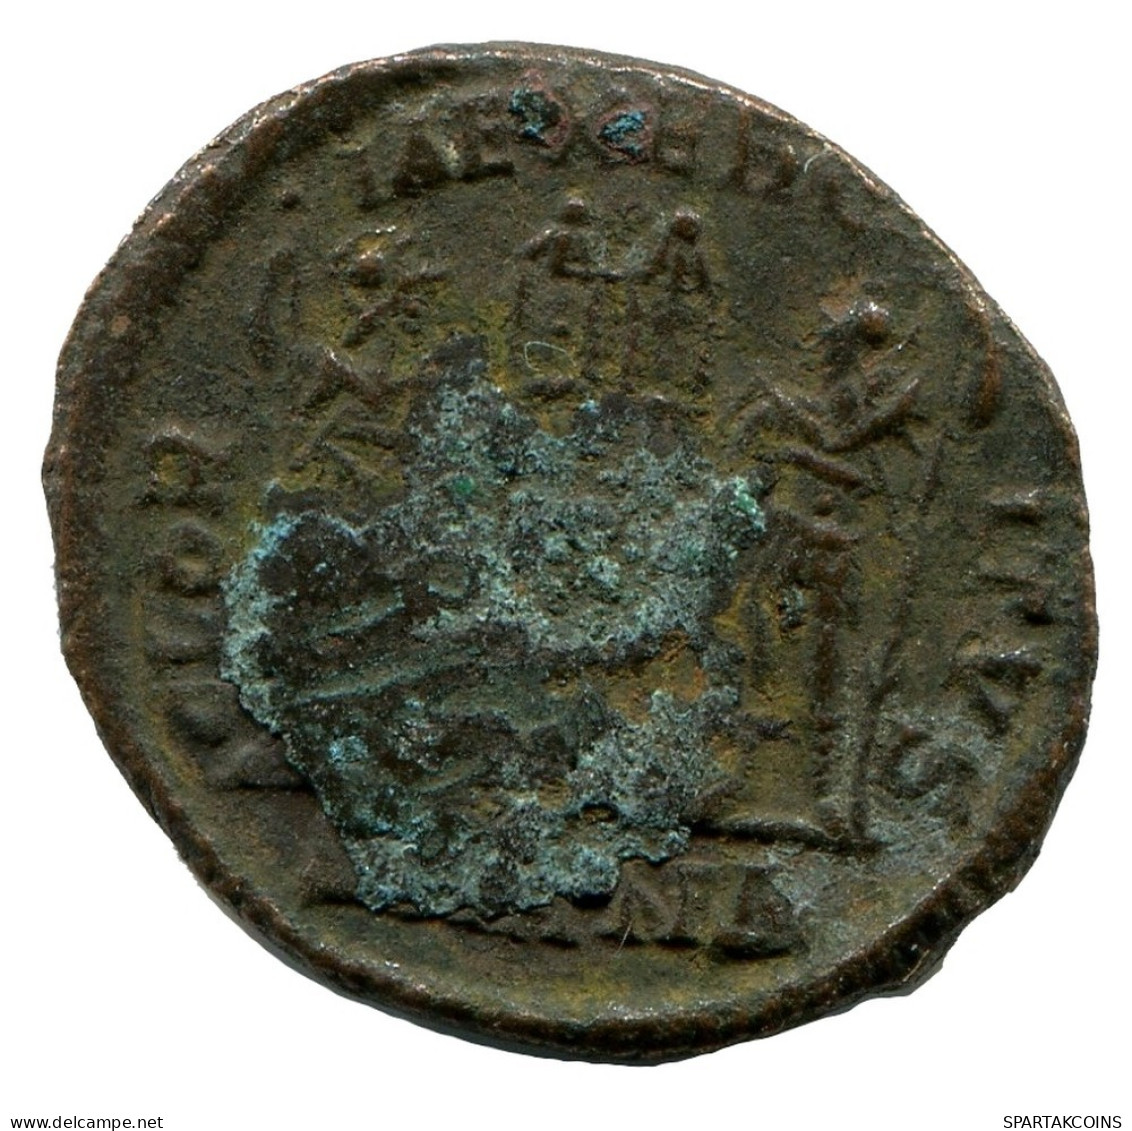 CONSTANTINE I MINTED IN ANTIOCH FOUND IN IHNASYAH HOARD EGYPT #ANC10588.14.U.A - The Christian Empire (307 AD To 363 AD)